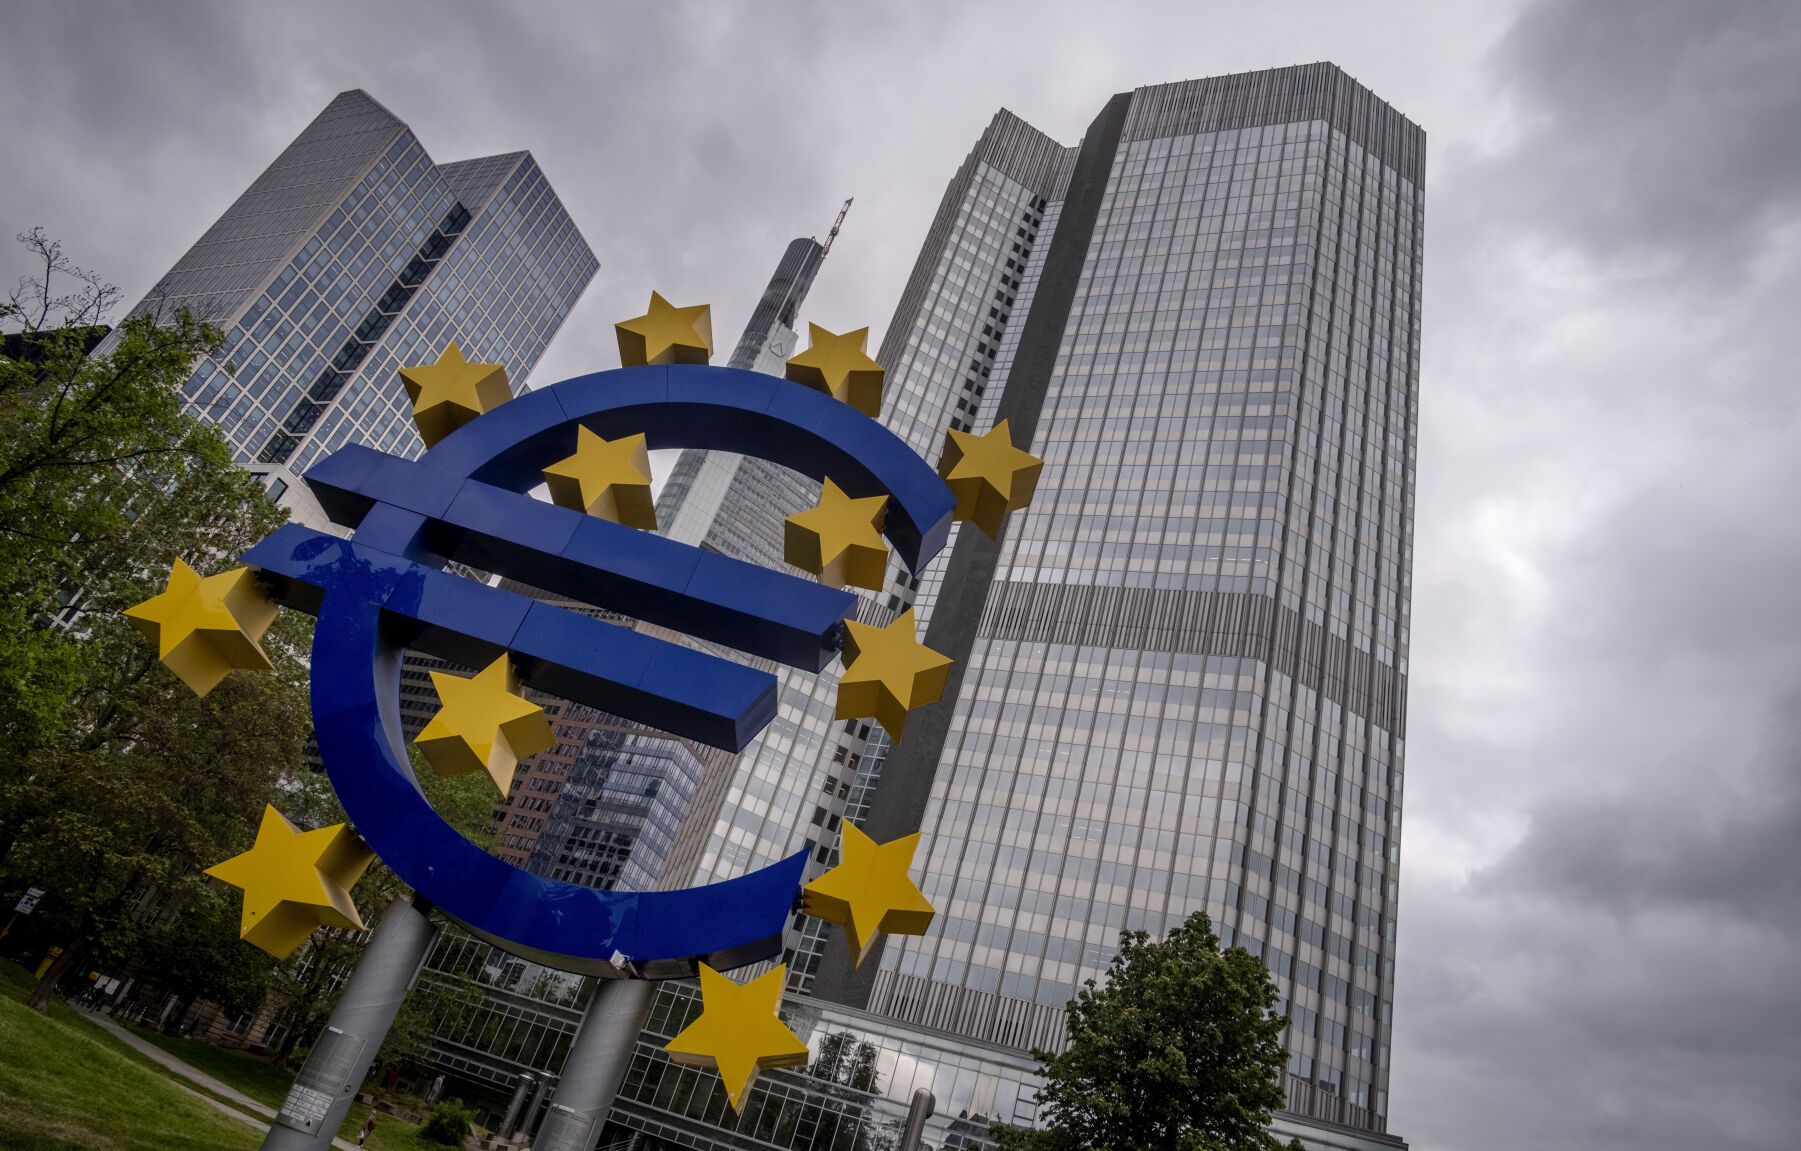 <p>The Euro sculpture stands in front of the former headquarters of the European Central Bank (ECB) in Frankfurt, Germany, Tuesday, May 23, 2023. The ECB celebrates its founding date 25 years ago on Wednesday. (AP Photo/Michael Probst)</p>   PHOTO CREDIT: Michael Probst 